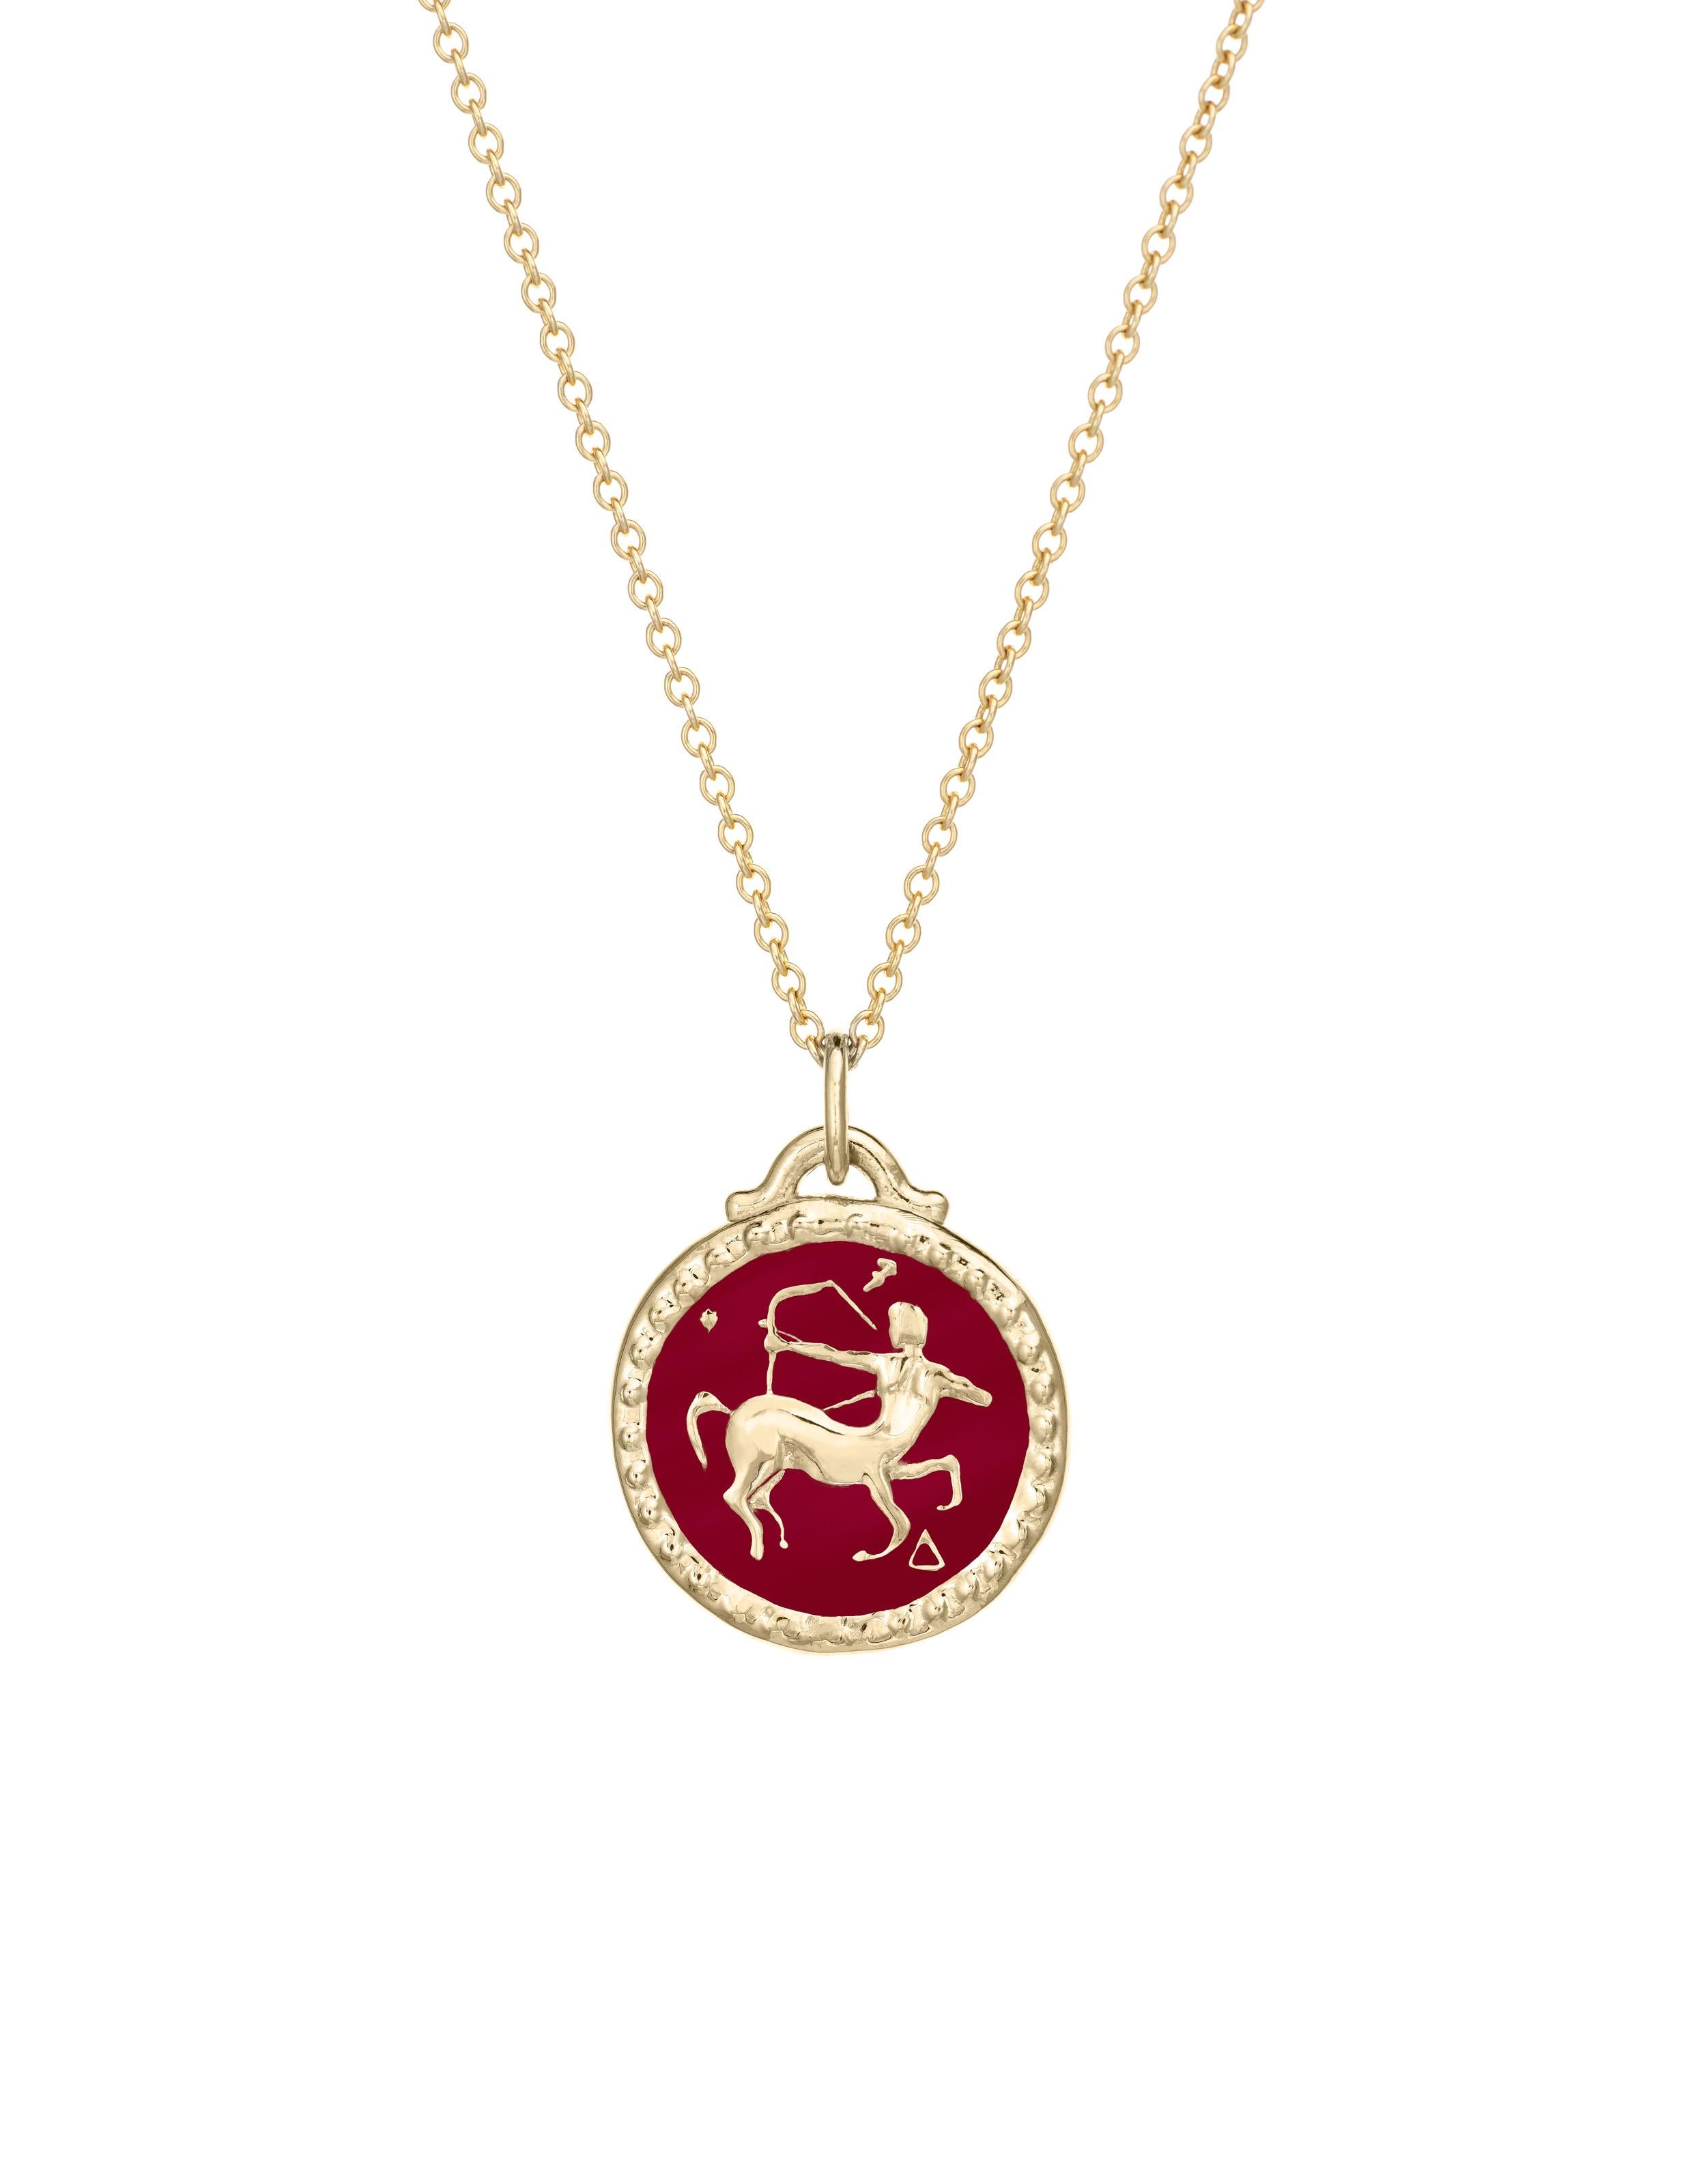 Part of our new Zodiac collection. The Sagittarius Pendant features a centaur on one side and the Sagittarius symbol on the other. Designs are meticulously hand-carved into 14k gold and finished with enamel. This pendant is customizable and